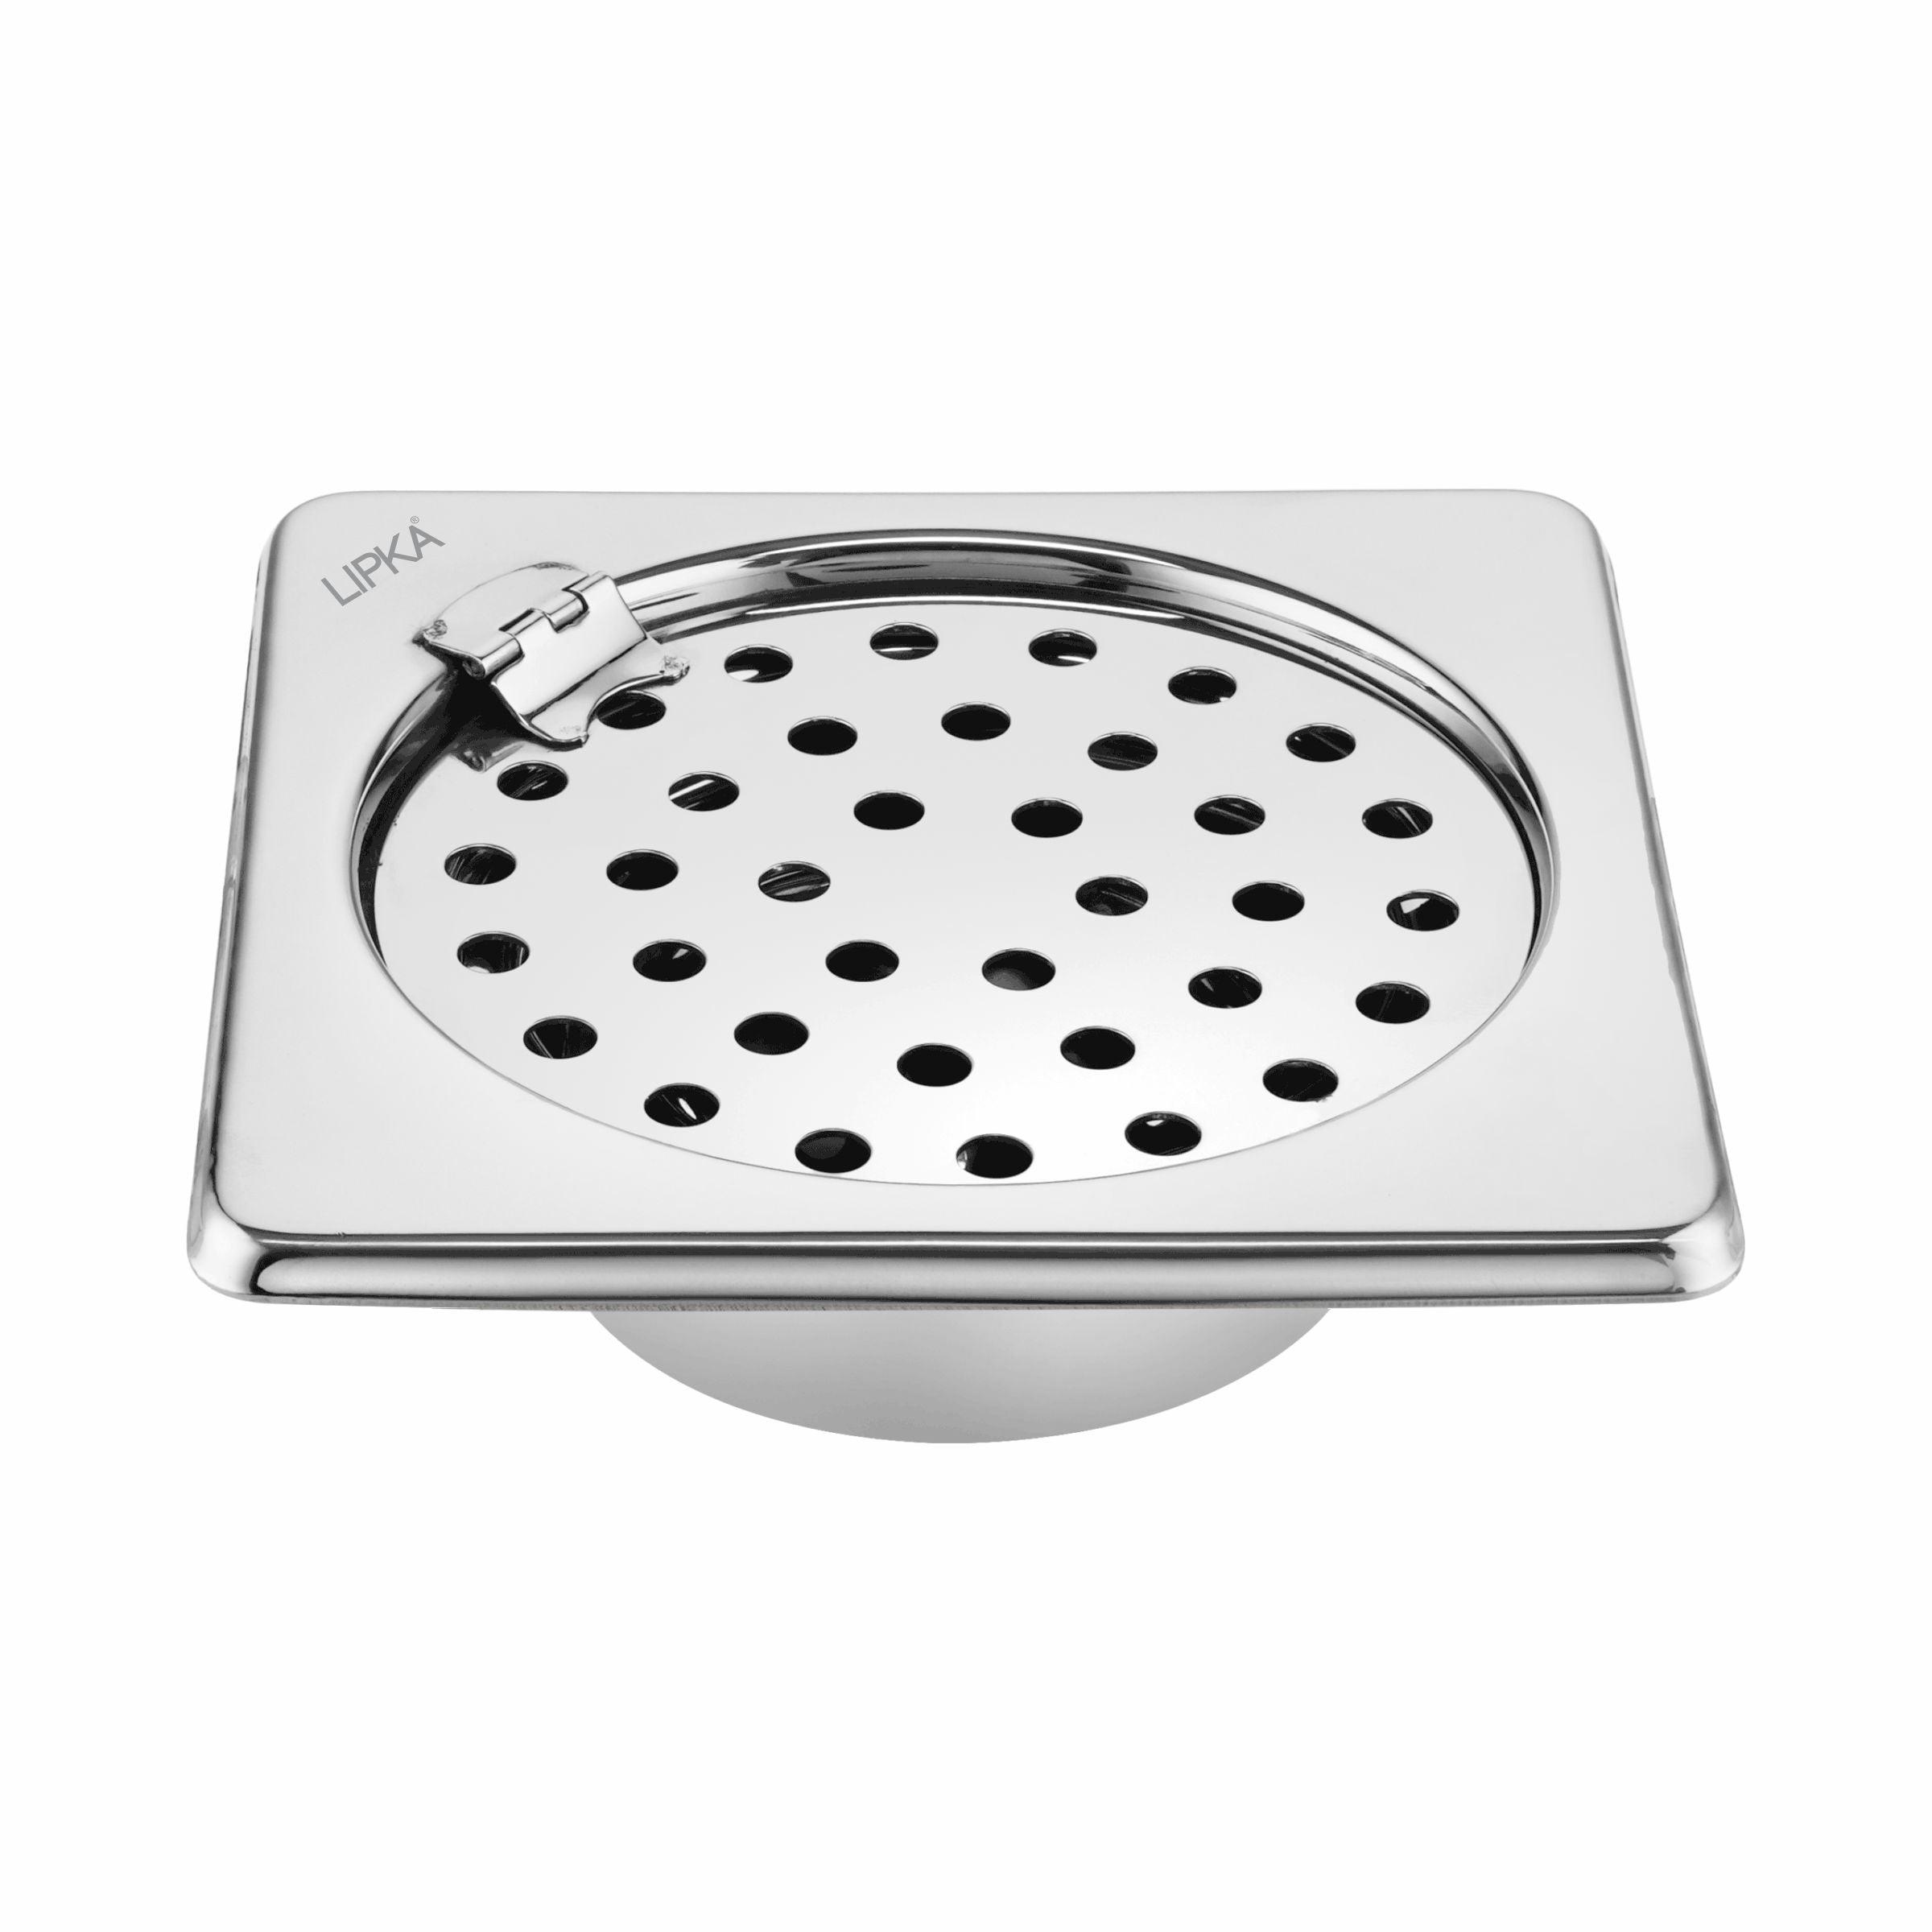 Super Sleek Square Floor Drain (5 x 5 Inches) With Hinge and Cockroach Trap - LIPKA - Lipka Home